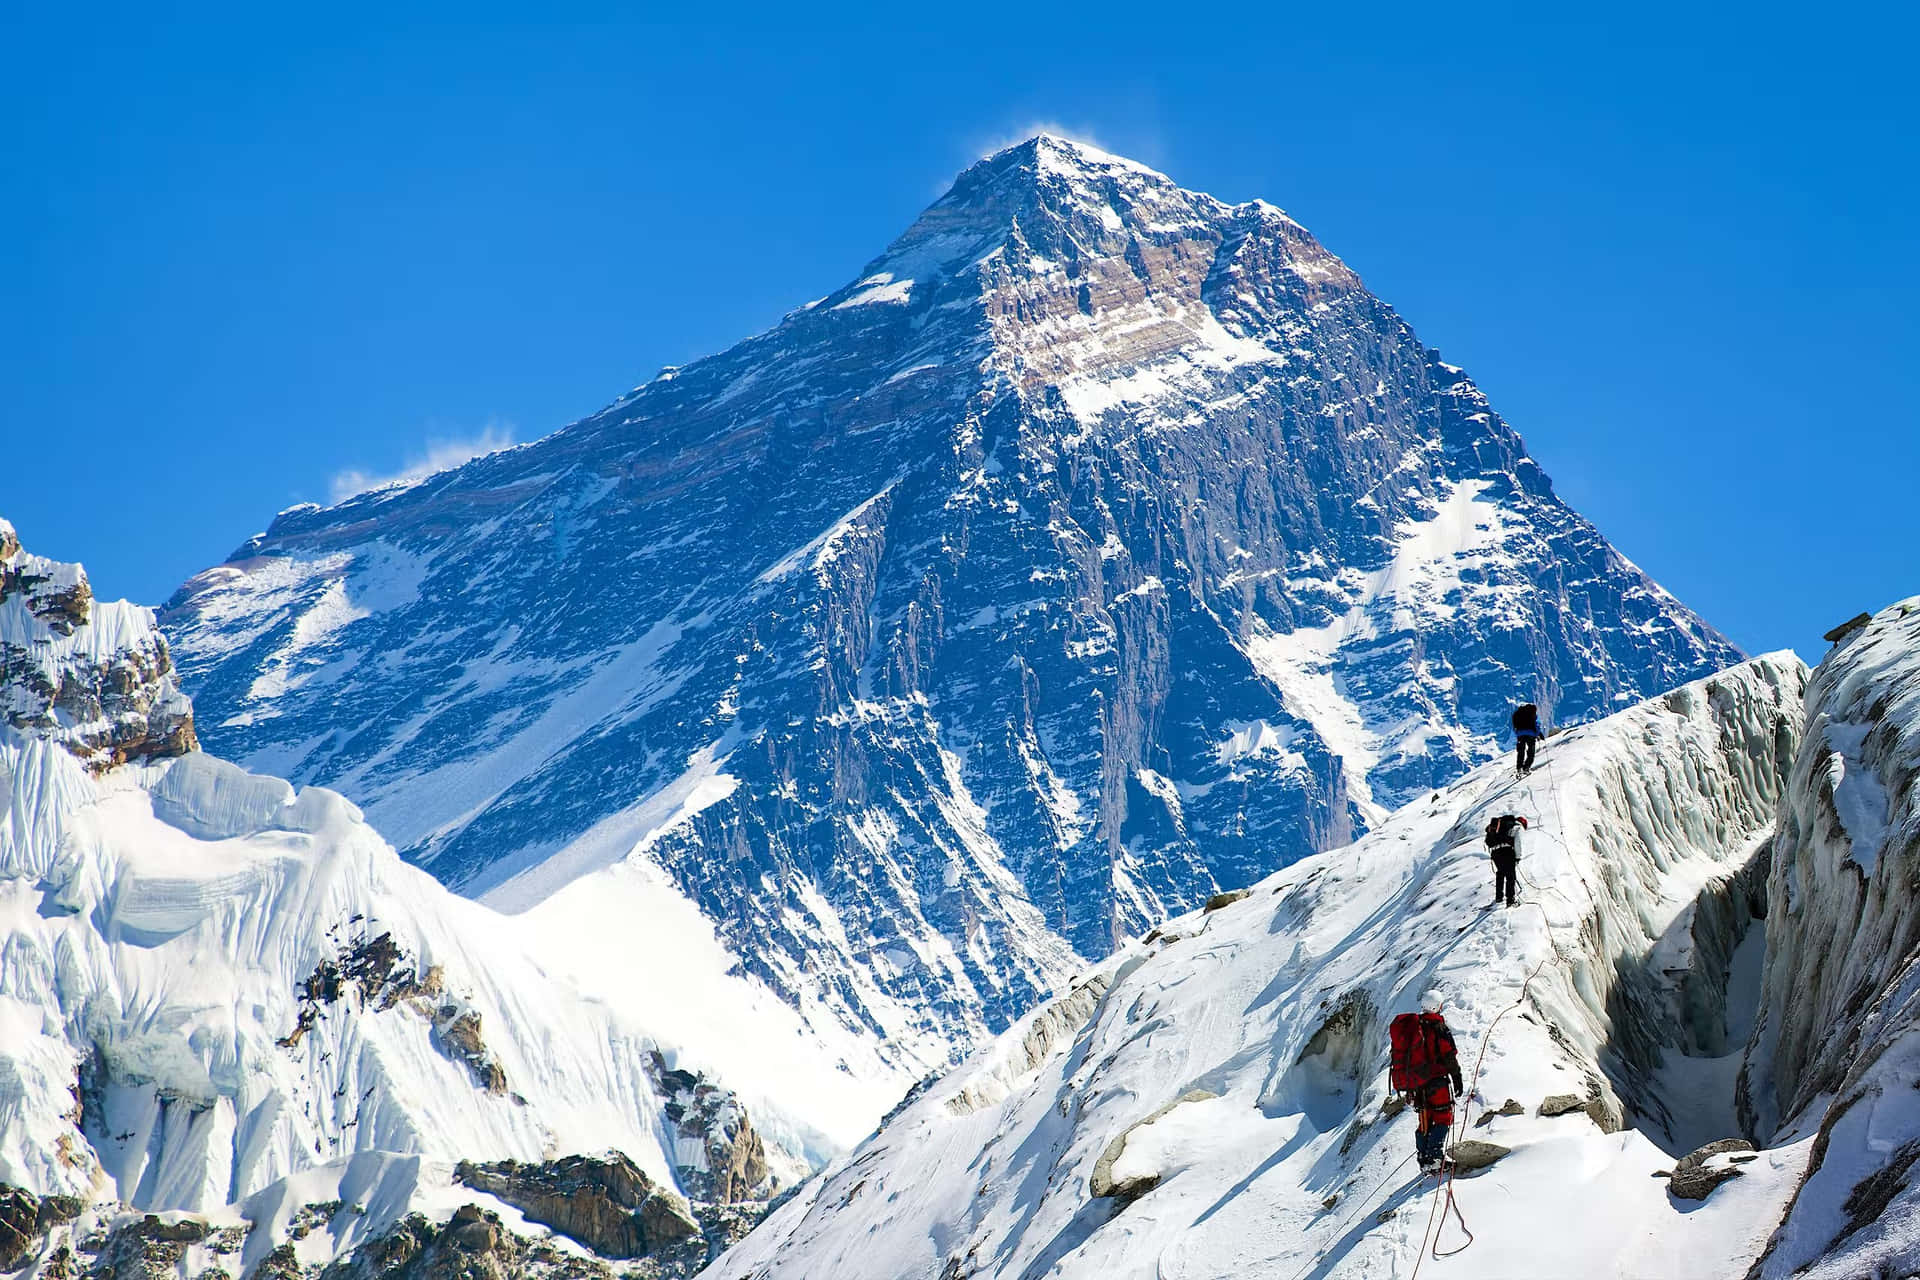 A Group Of People Climbing Up A Snowy Mountain